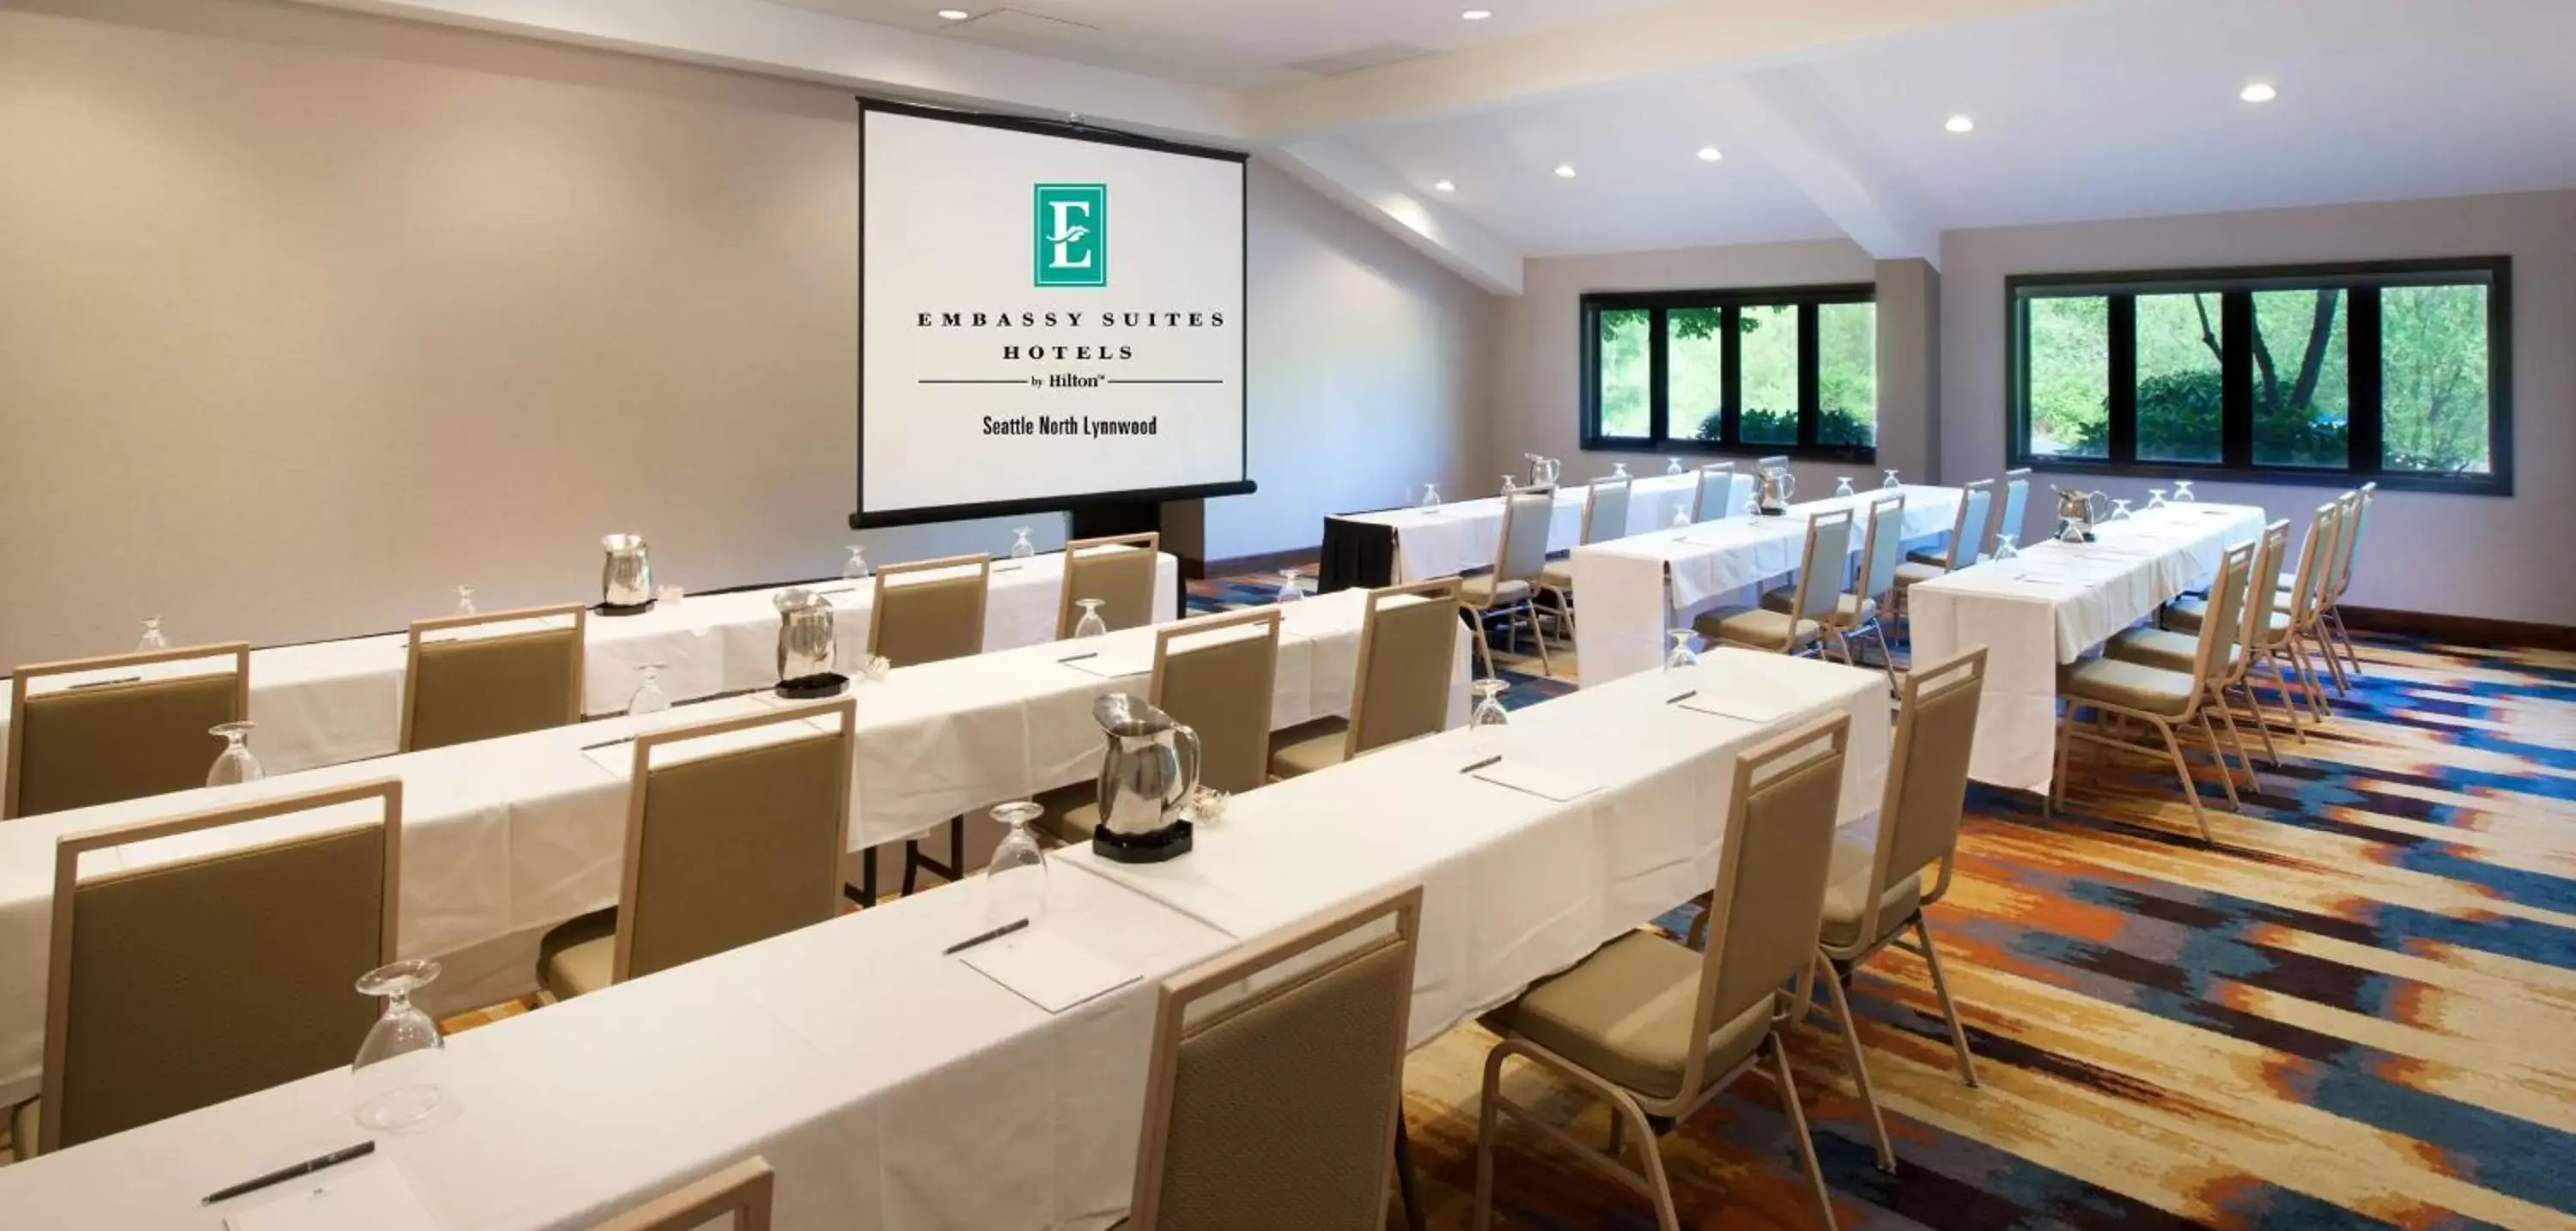 Meeting/conference room in Embassy Suites by Hilton Seattle North Lynnwood